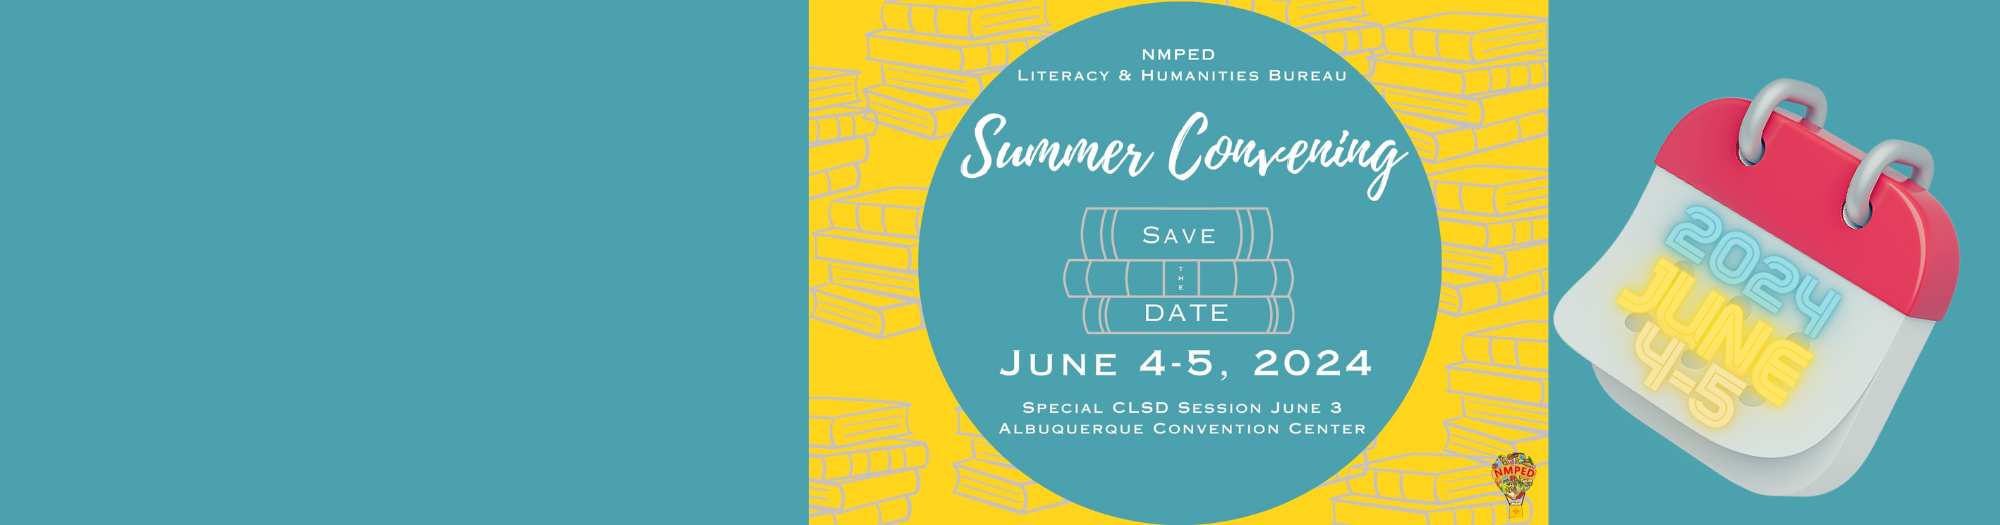 NMPED LITERACY & HUMANITIES BUREAU Summer Convening SAVE THE DATE JUNE 4-5, 2024 SPECIAL CLSD SESSION JUNE 3 ALBUQUERQUE CONVENTION CENTER